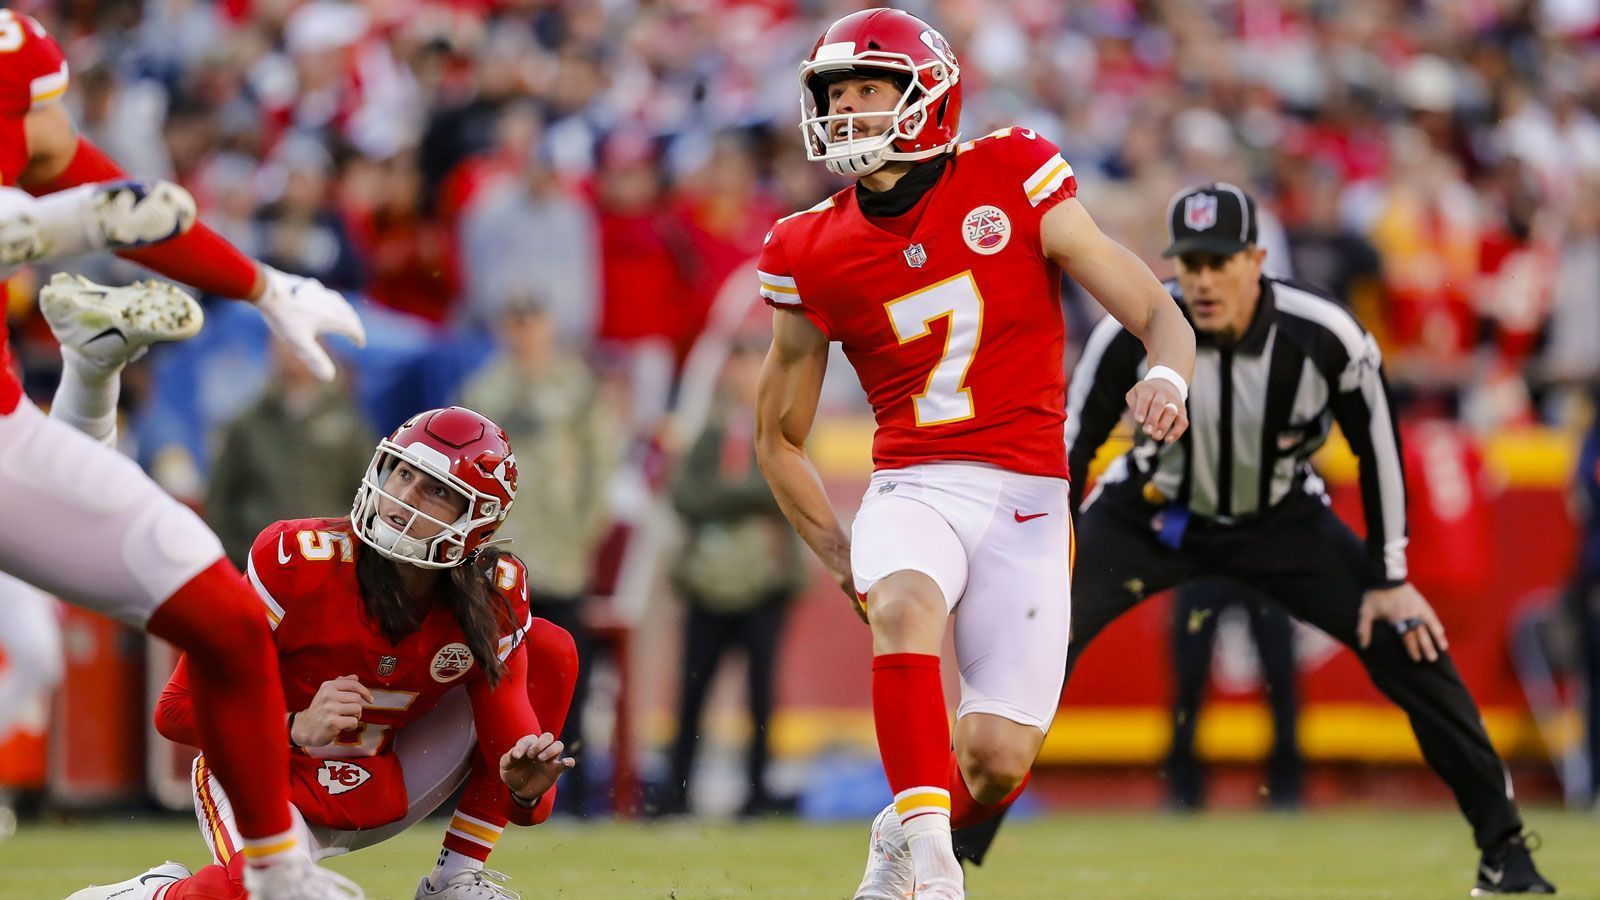 
                <strong>Platz 2: Harrison Butker</strong><br>
                &#x2022; Team: Kansas City Chiefs<br>&#x2022; <strong>Overall Rating: 84</strong><br>&#x2022; Key Stats: Kick Power: 96 – Kick Accuracy: 90 – Stamina: 82<br>
              